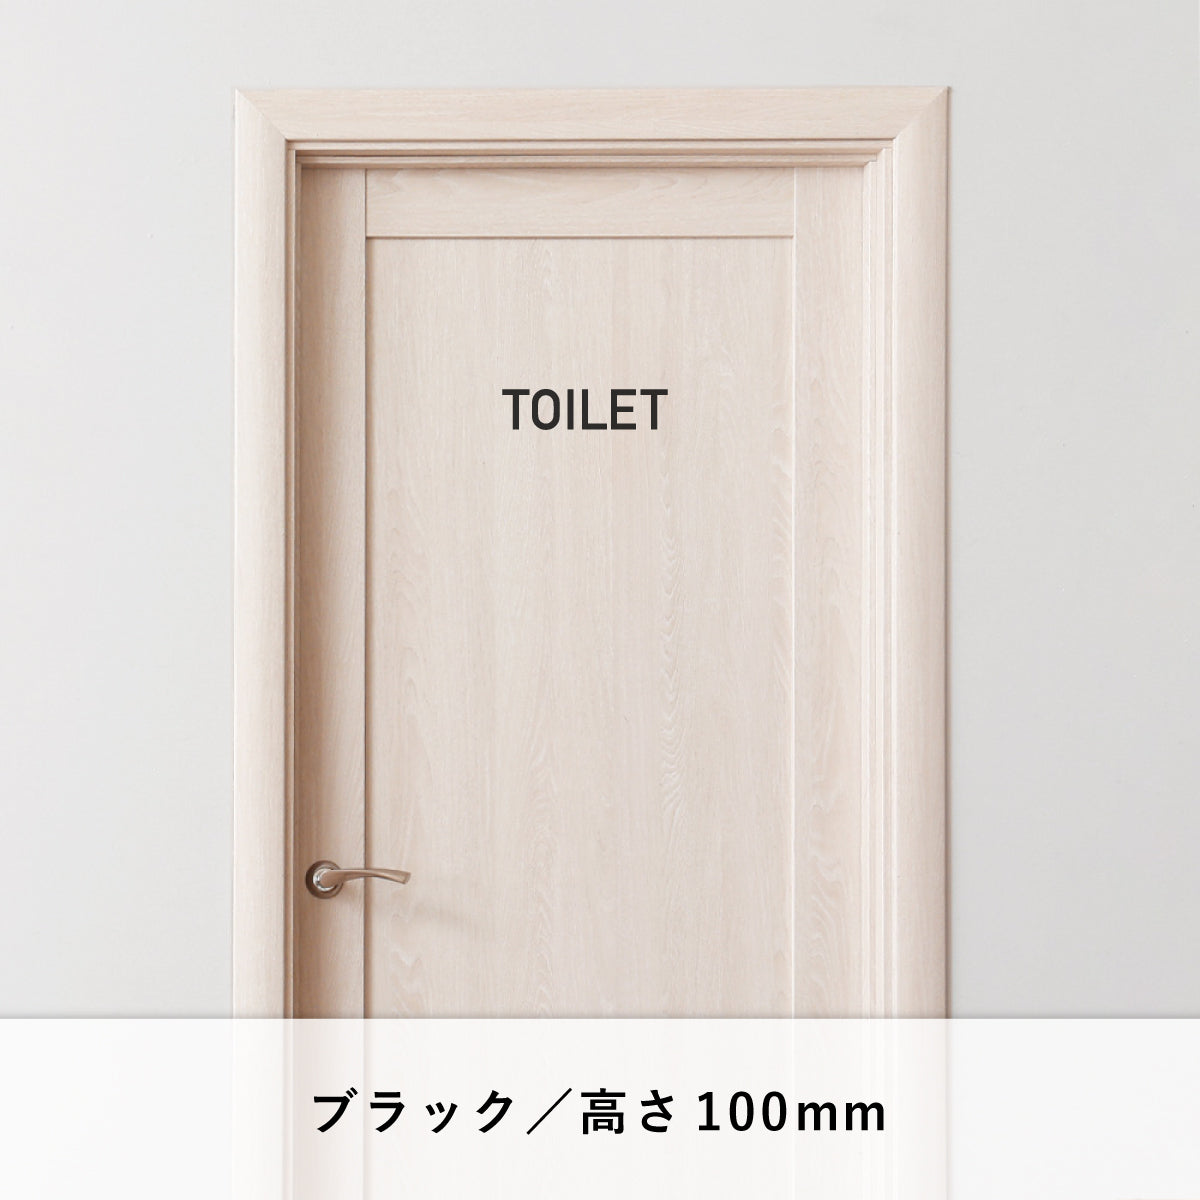 TOILET（トイレ）文字切り抜きステッカー